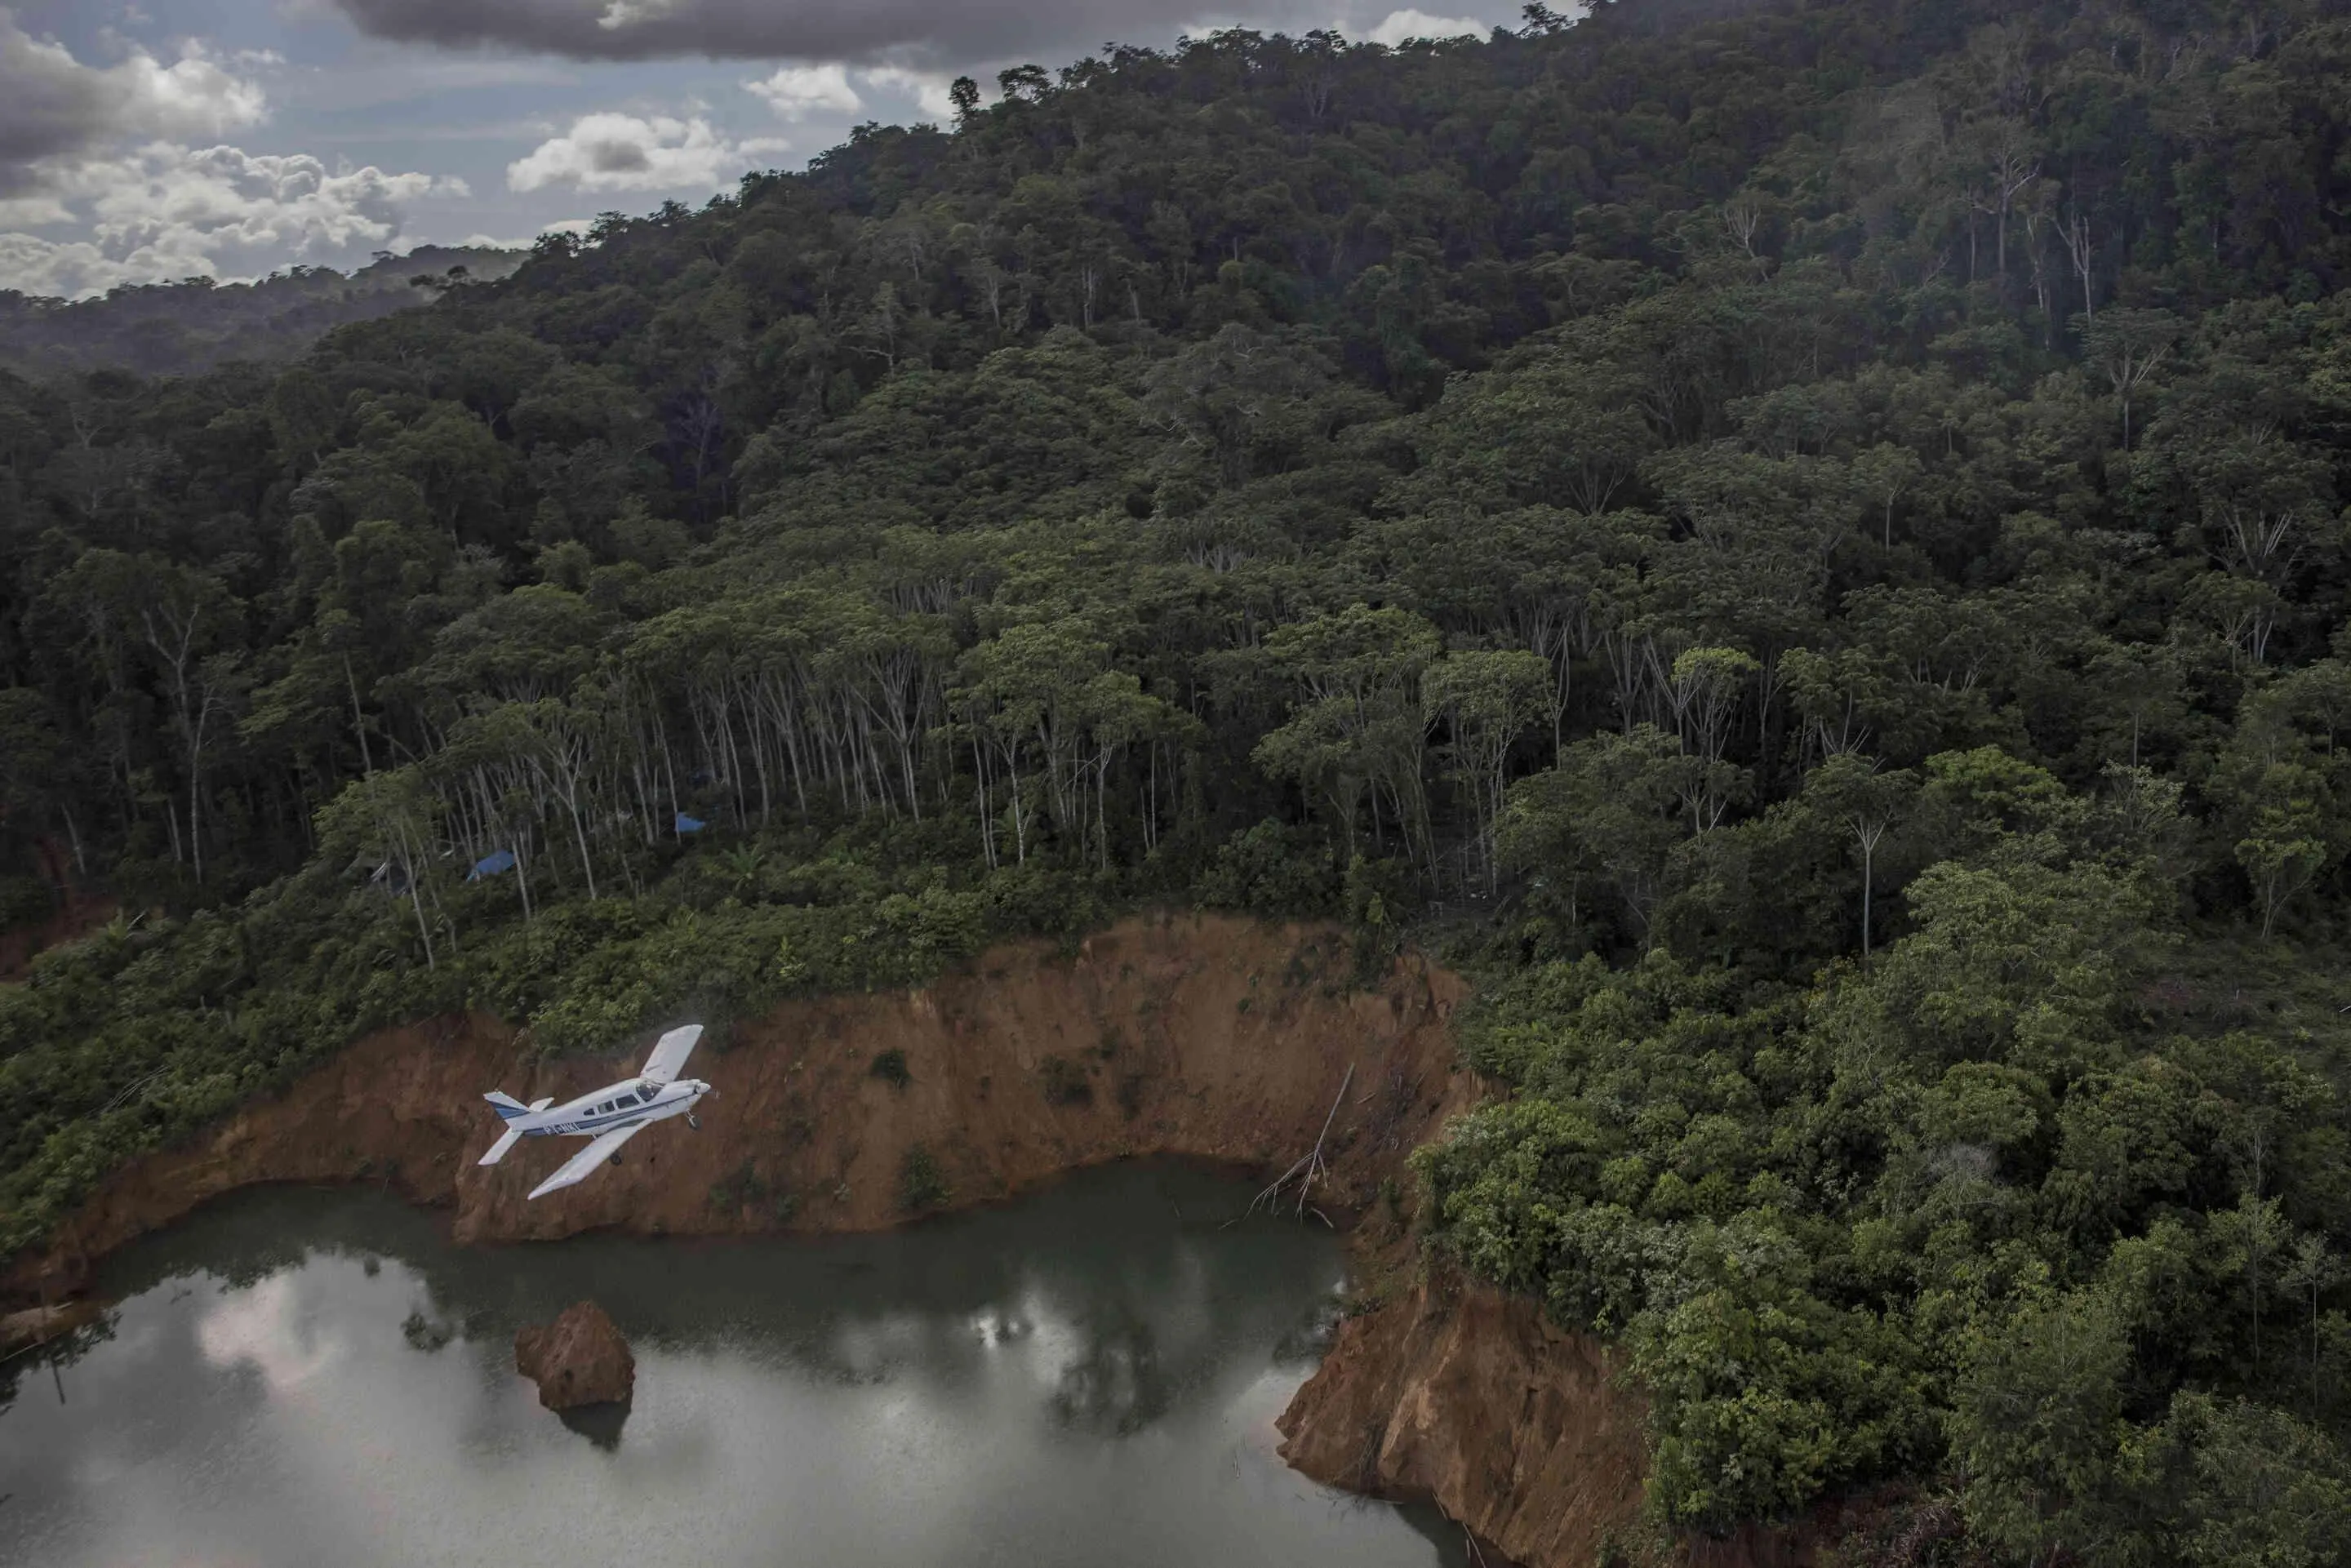 A small plane flies over the rainforest.